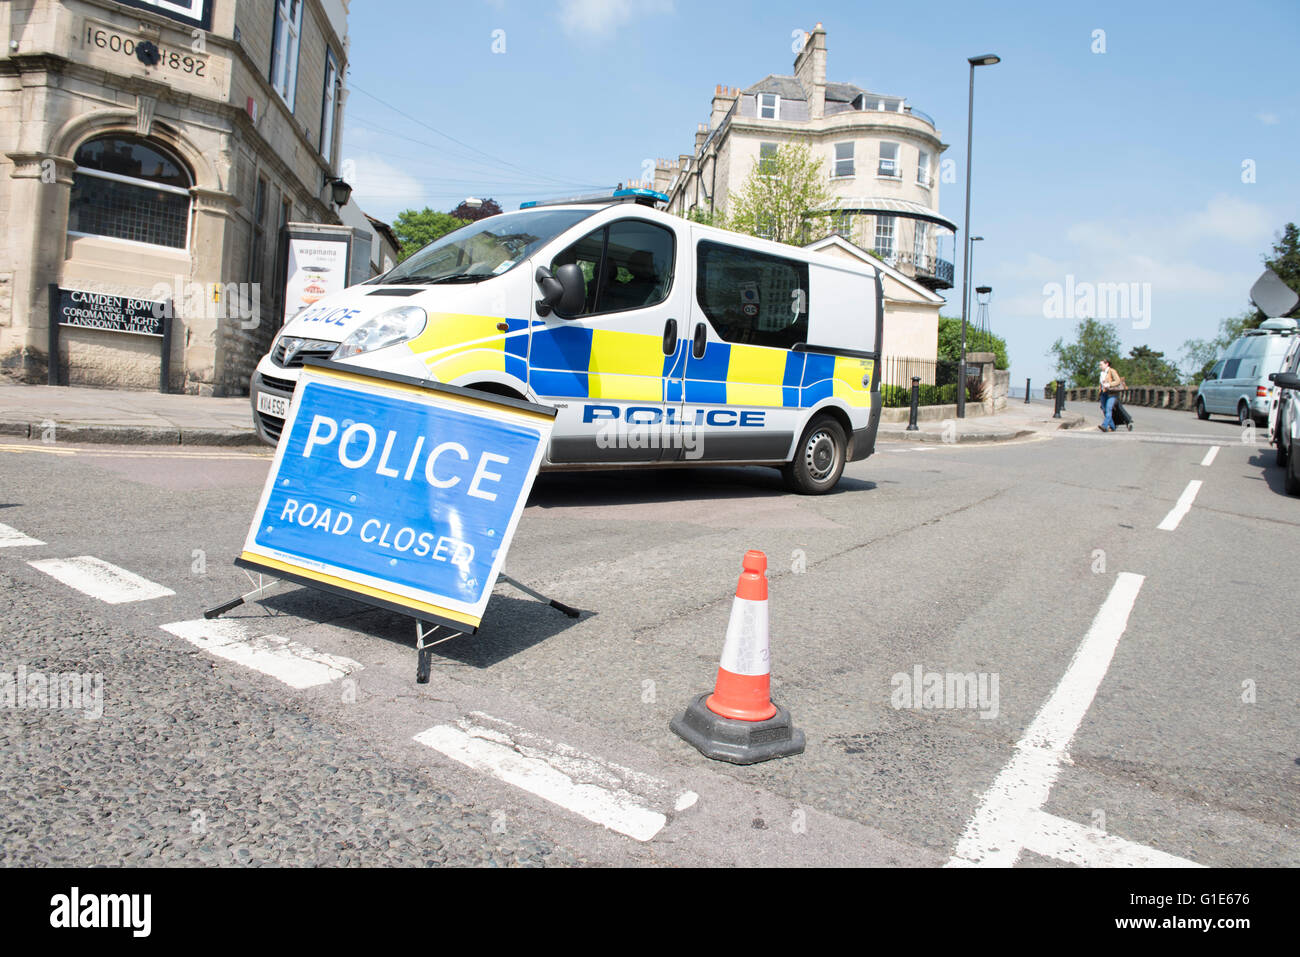 An unexploded World War II bomb was found at a school in Bath. The army arrived to remove it from the site, and police evacuated people from the neighbourhood. Stock Photo